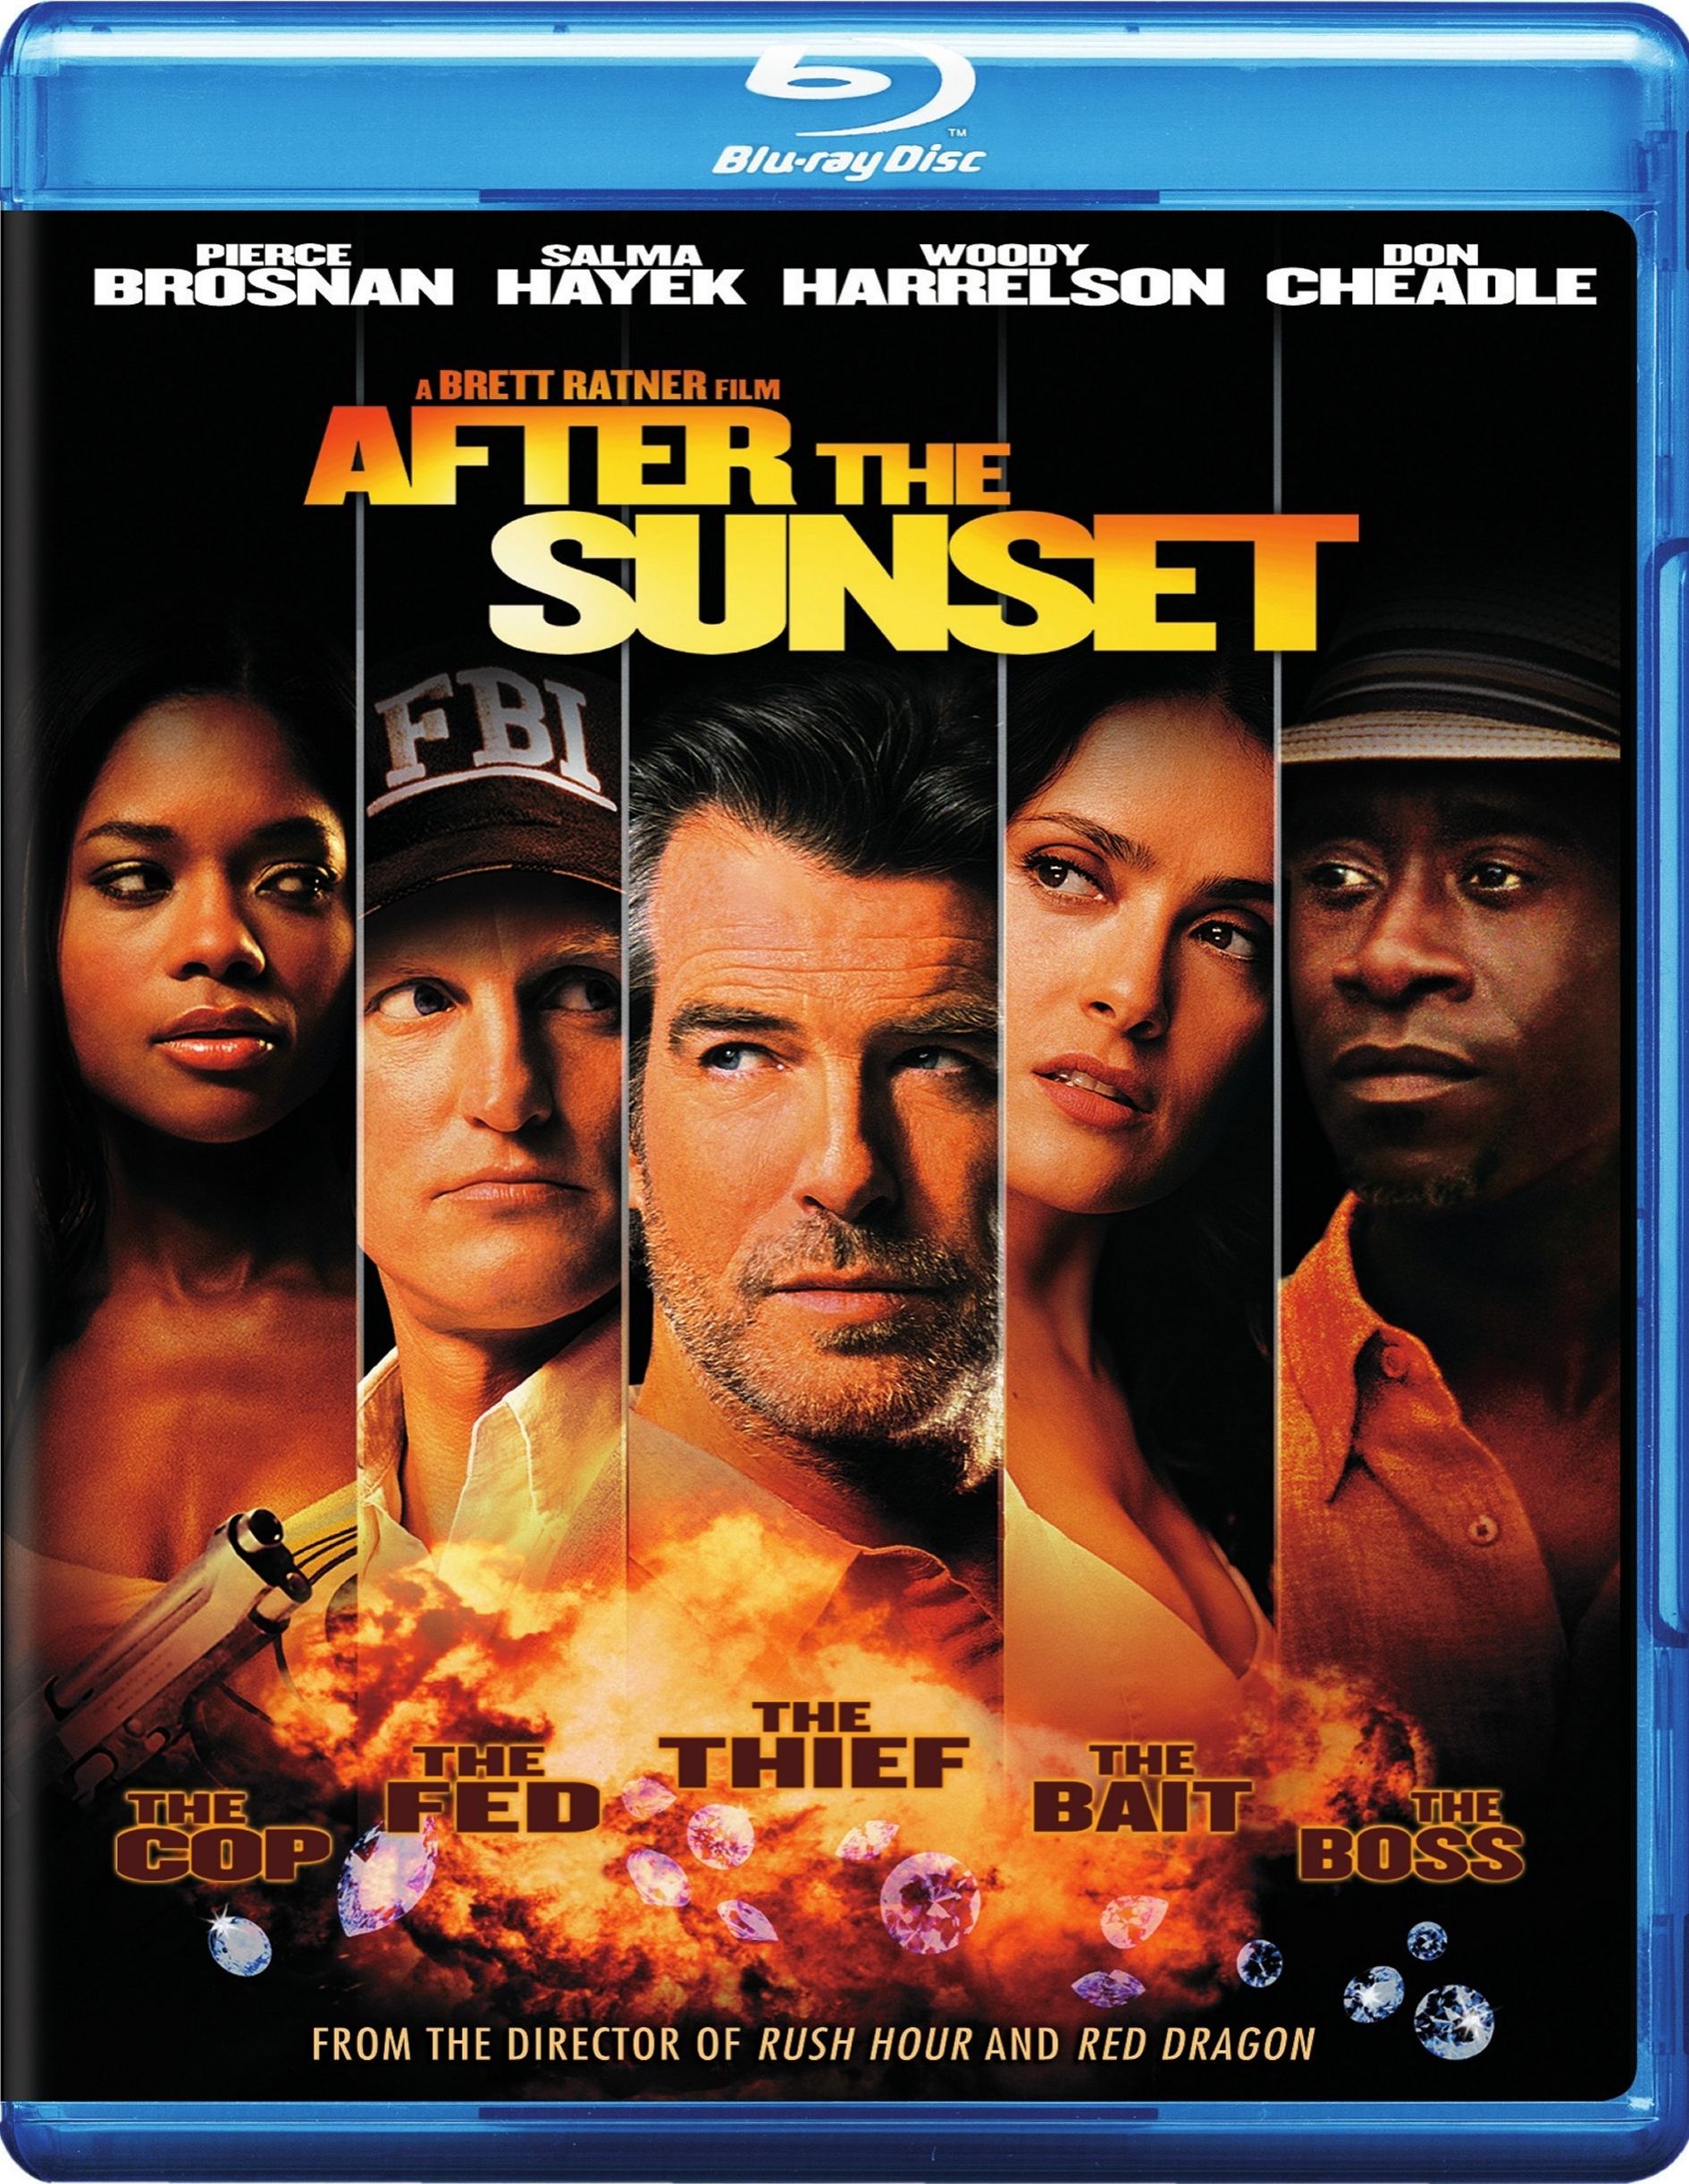 After the Sunset DVD Release Date March 29, 2005